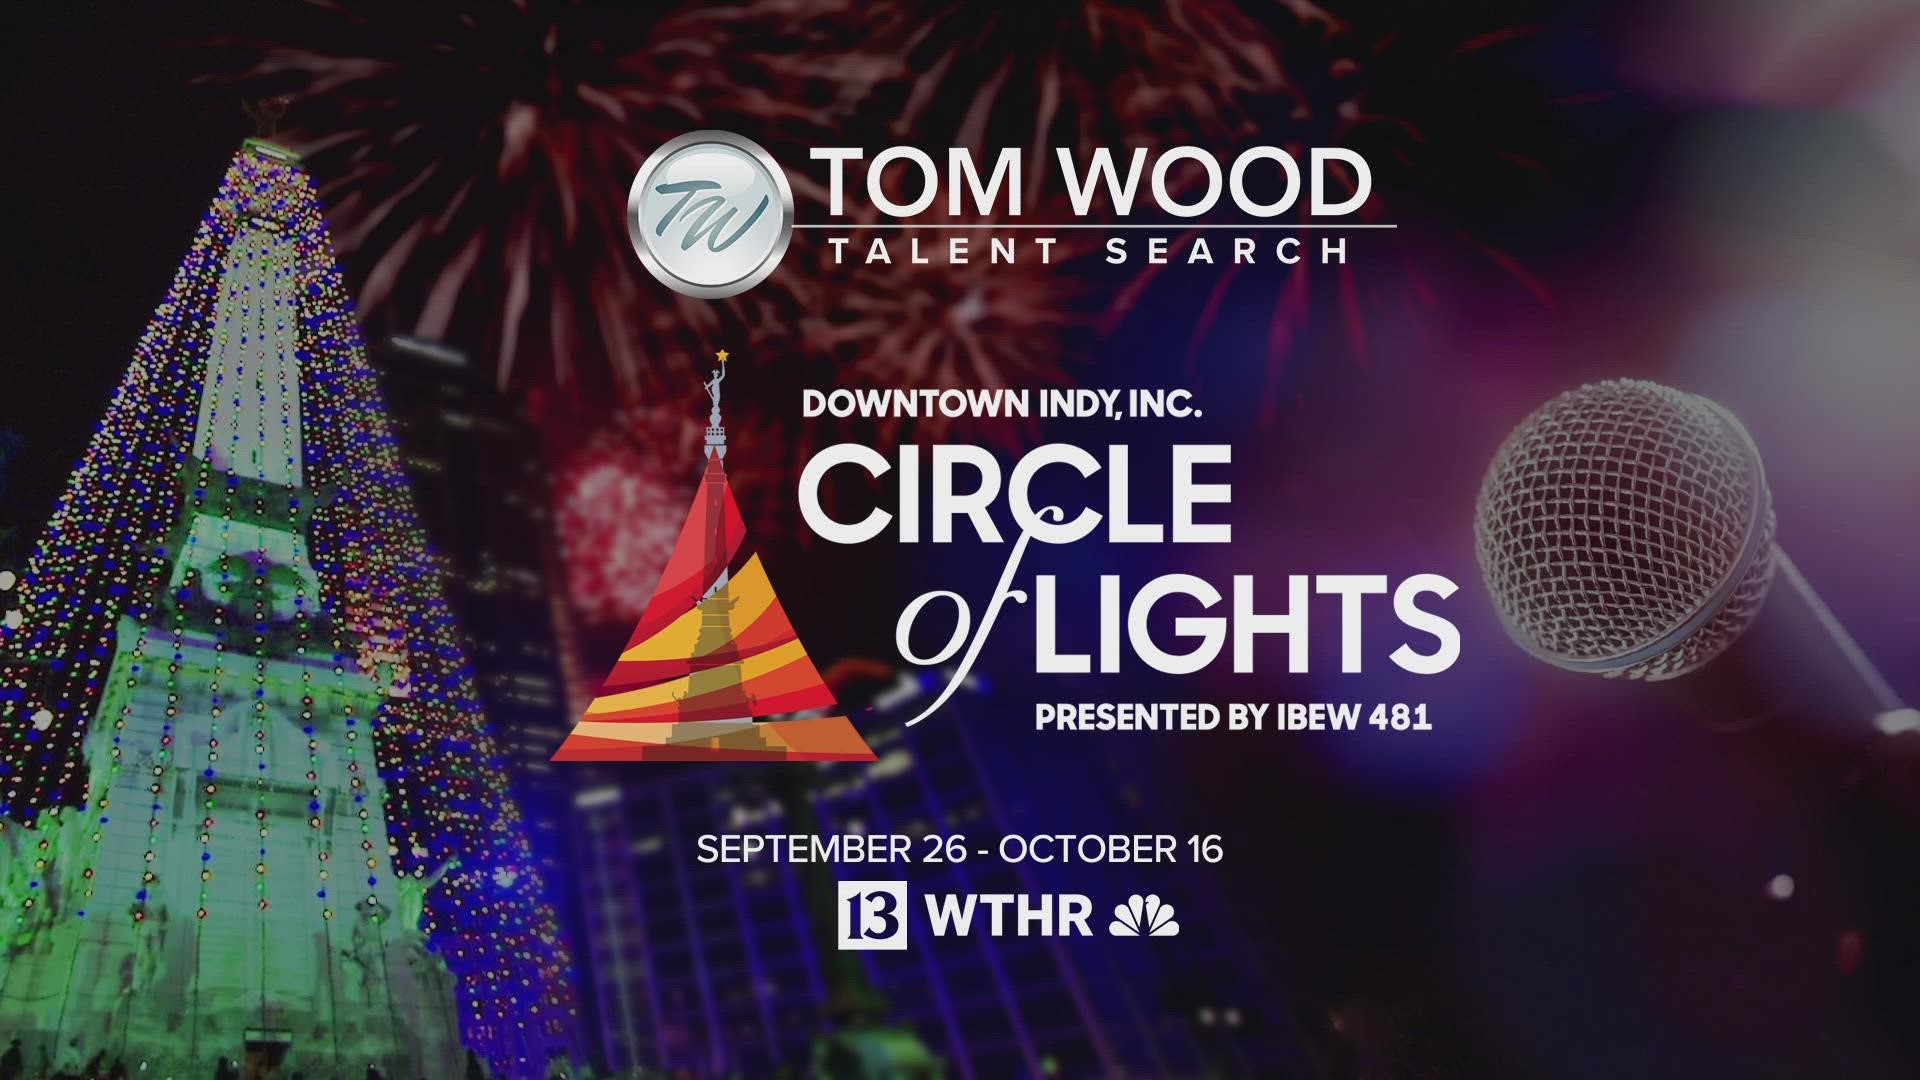 You can submit your audition video for the Tom Wood Talent Search now through October 16th by going to WTHR.com / Circle of Lights.